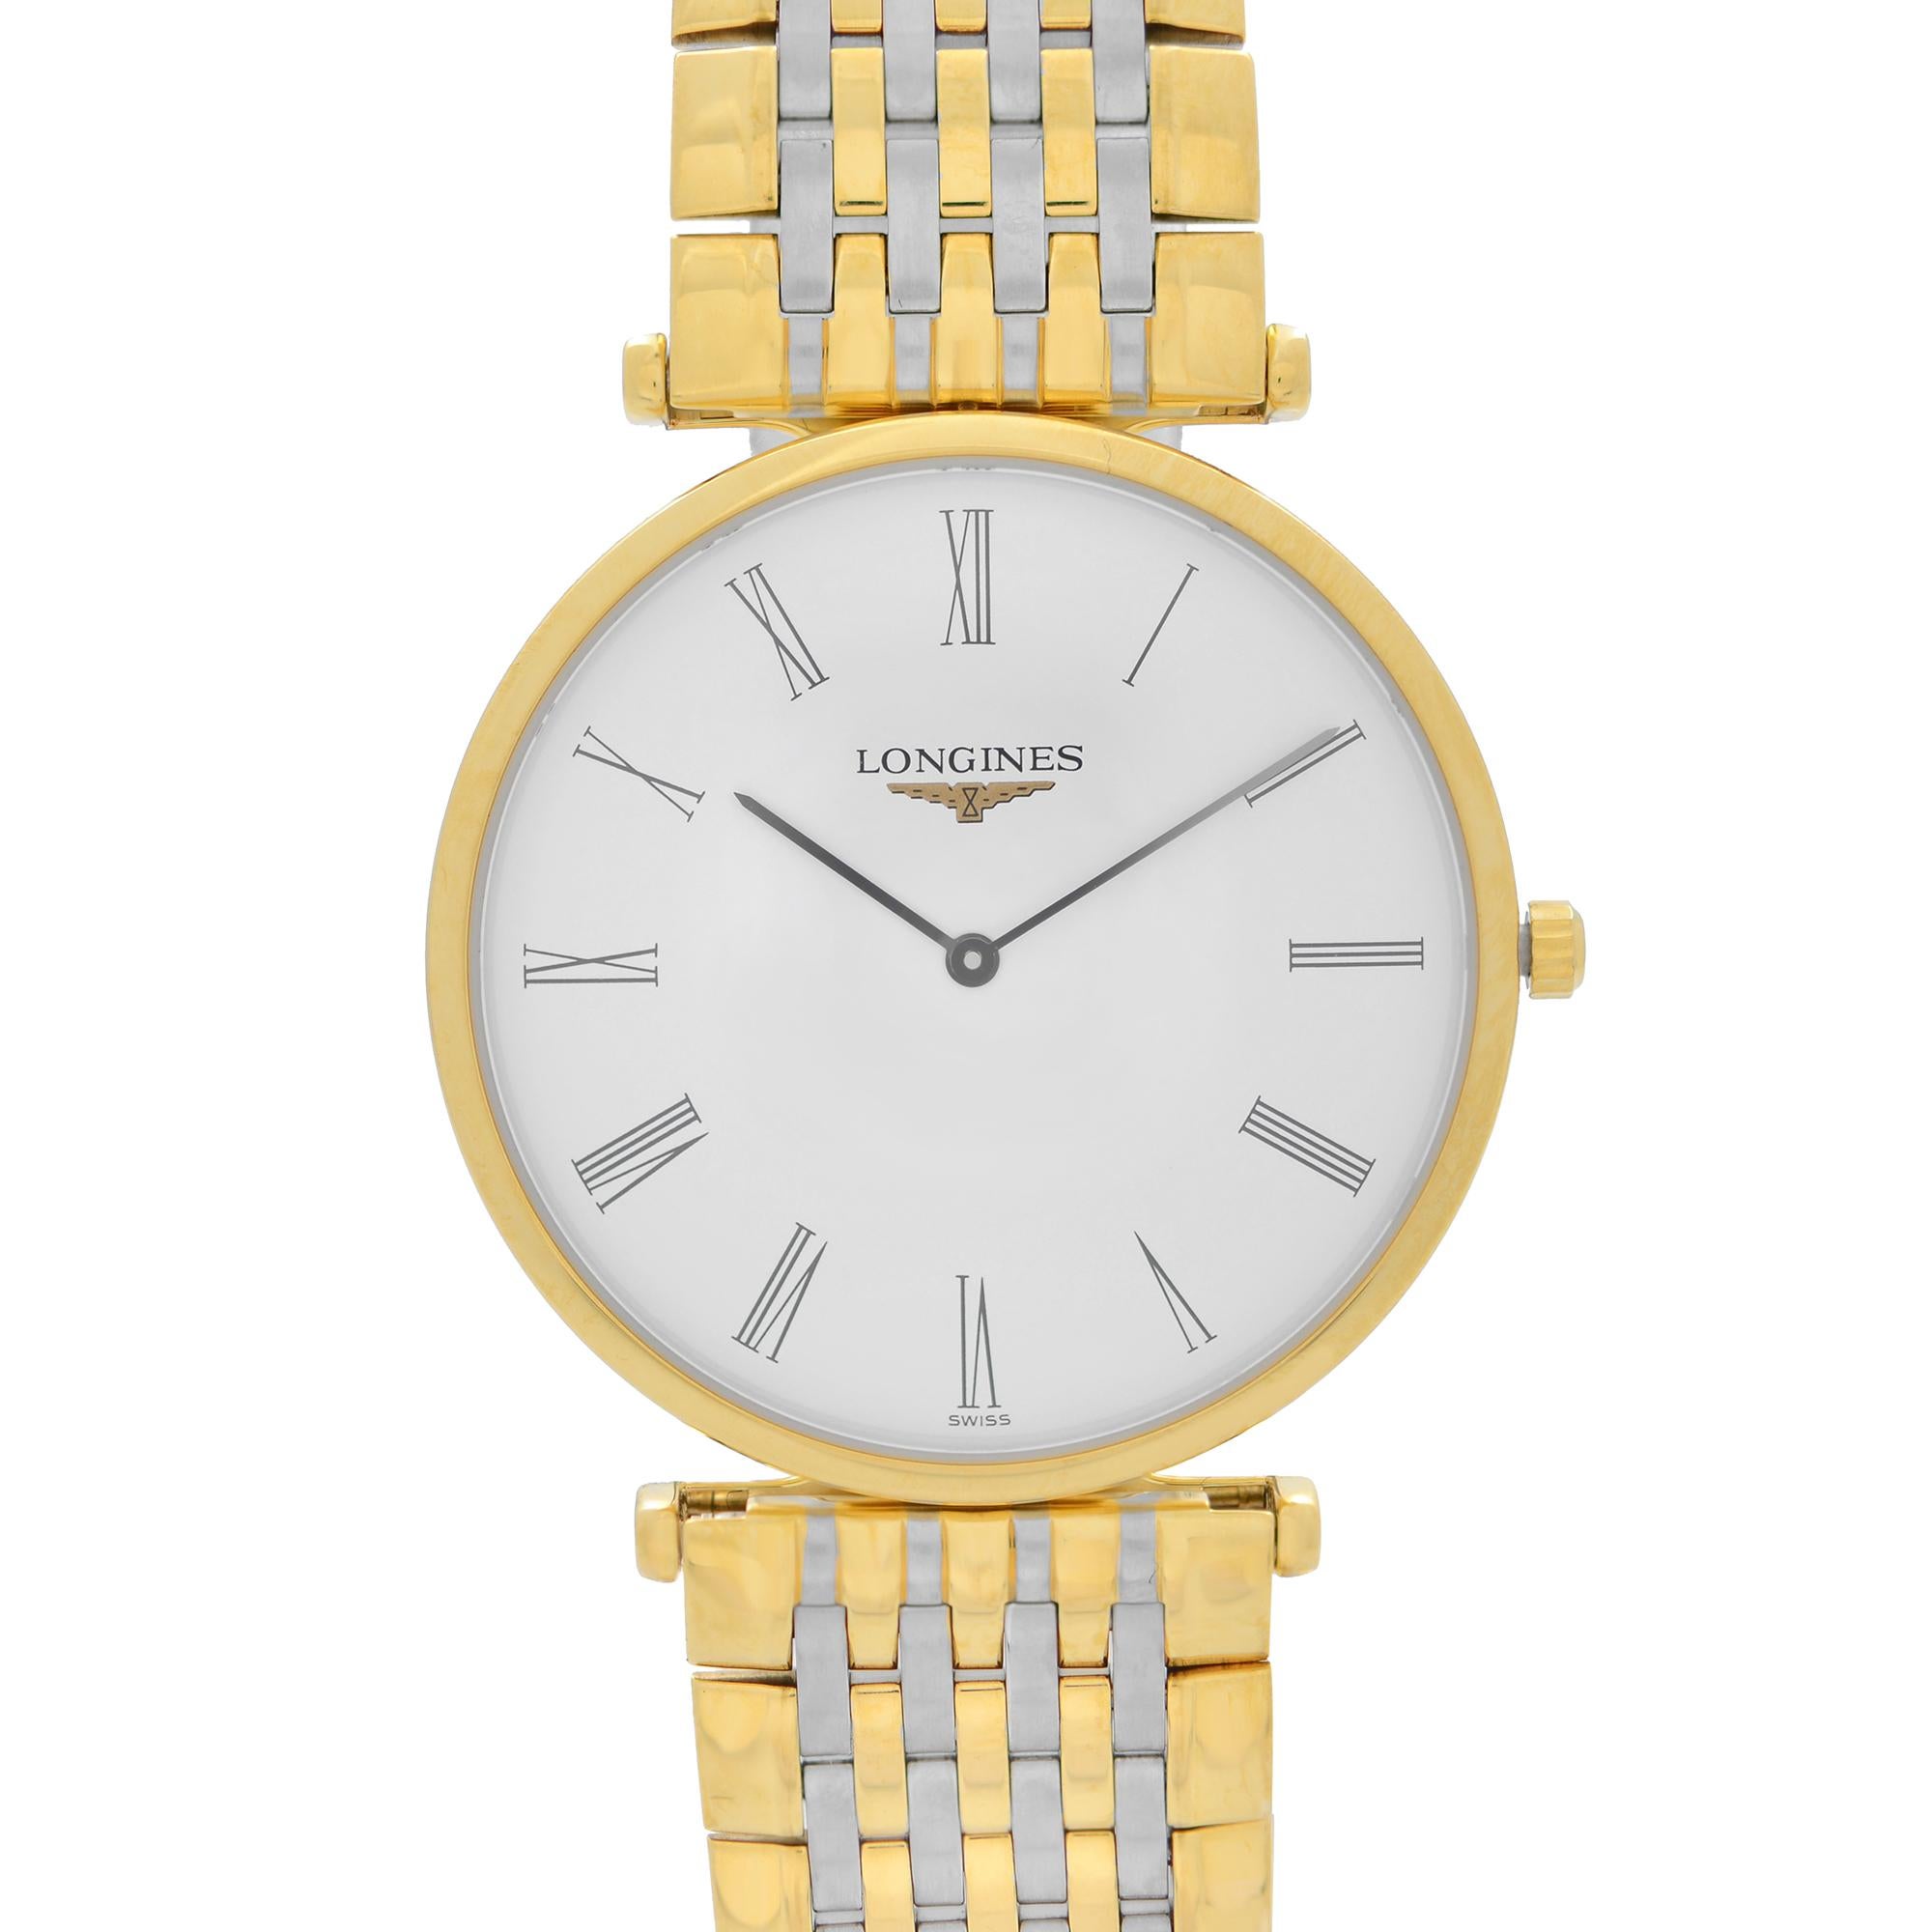 Pre-owned Excellent Condition. The gold-Tone part has minor blemishes and the back case has minor scratches. Longines La Grande Classique Two Tone Steel White Dial Quartz Watch L47092117. This Beautiful Timepiece Features: Stainless Steel Case with